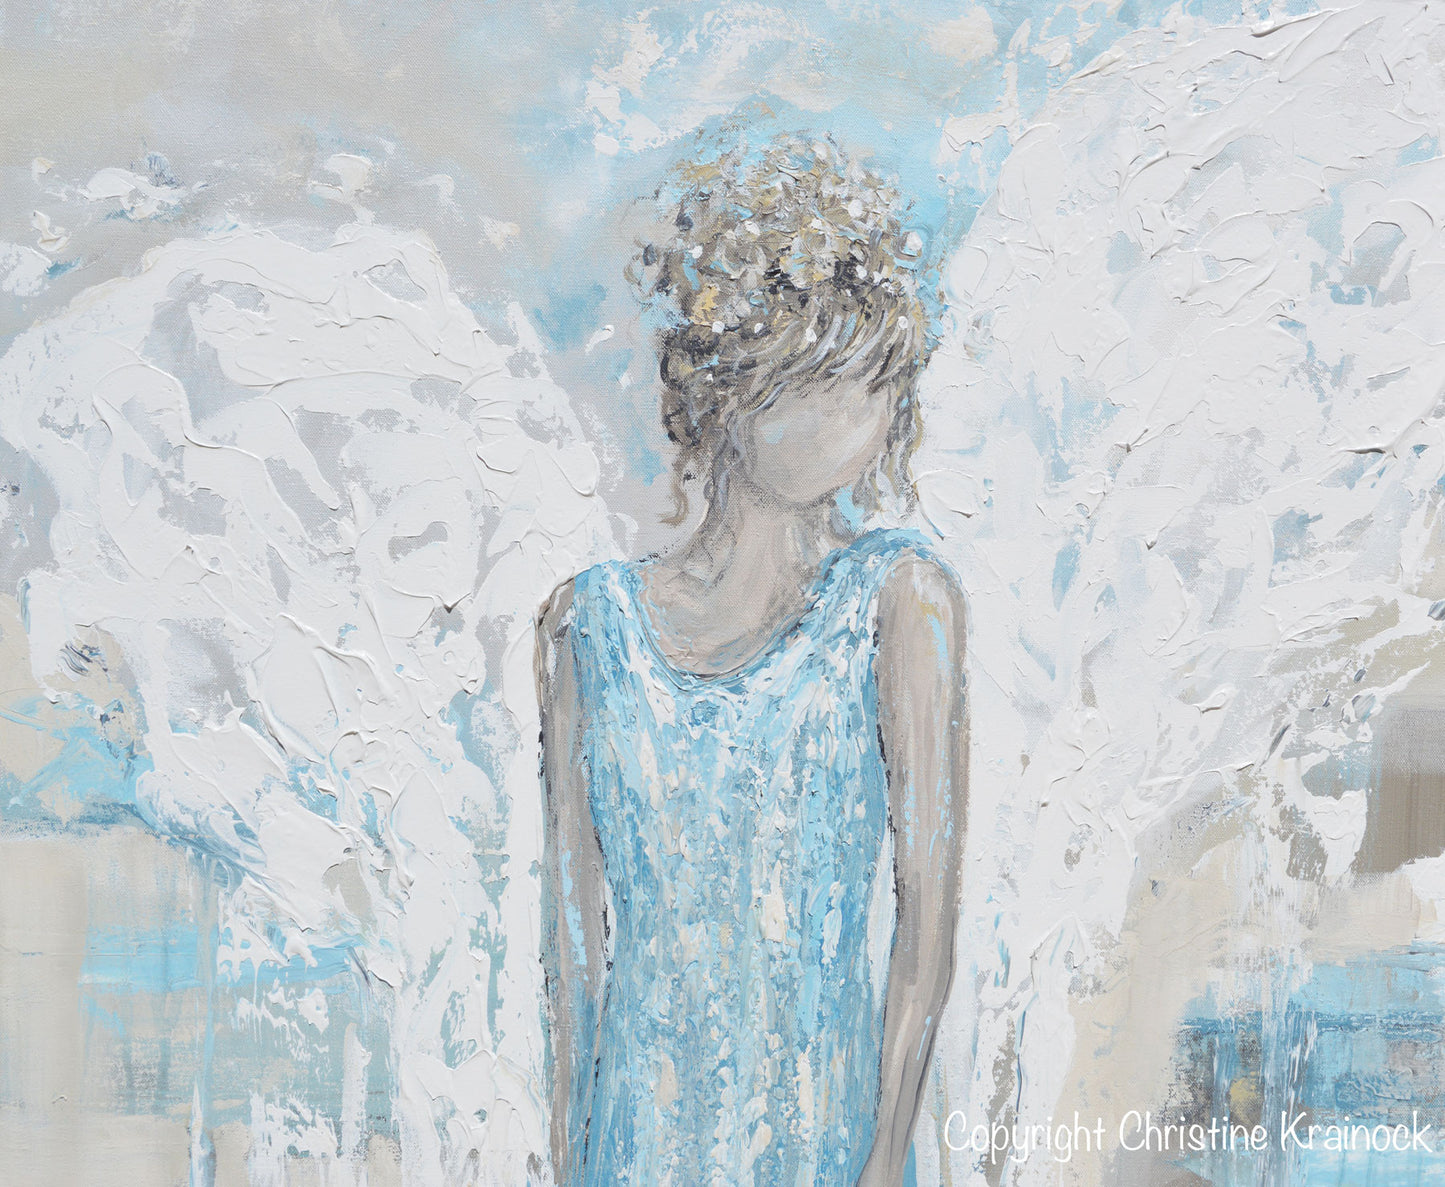 ORIGINAL Abstract Angel Painting Guardian Angel Wings Textured Blue White Grey Home Decor Wall Art X Large 30x40"